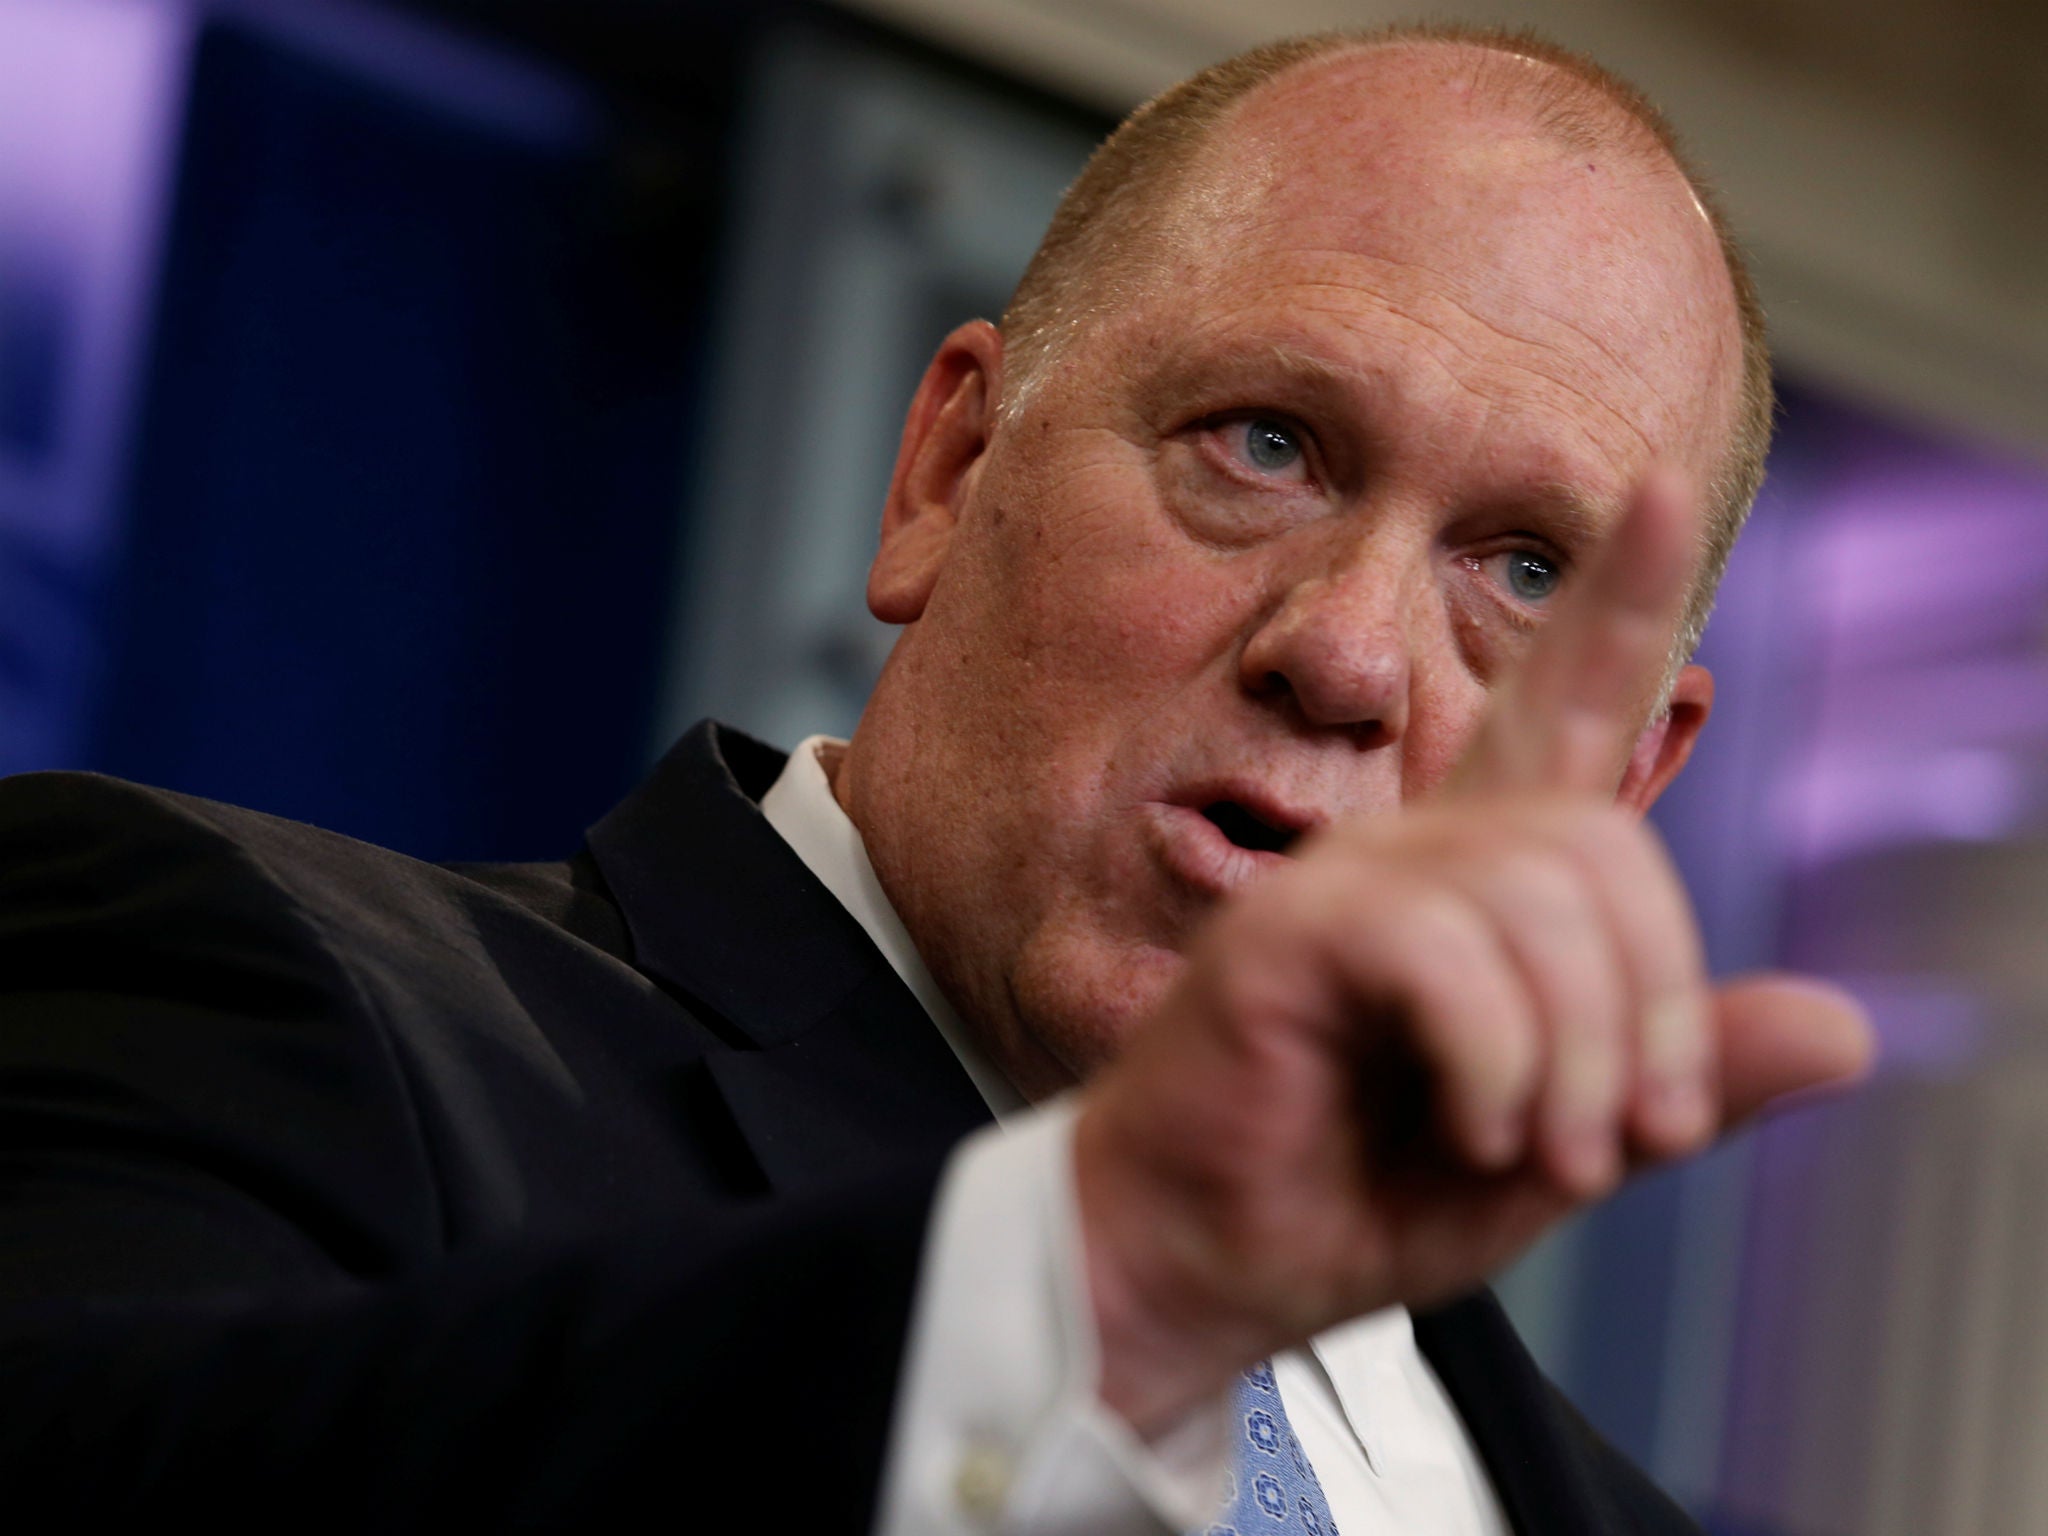 US Immigration and Customs Enforcement acting director Thomas Homan is among the officials who have slammed Oakland Mayor Libby Schaaf for preventing arrests